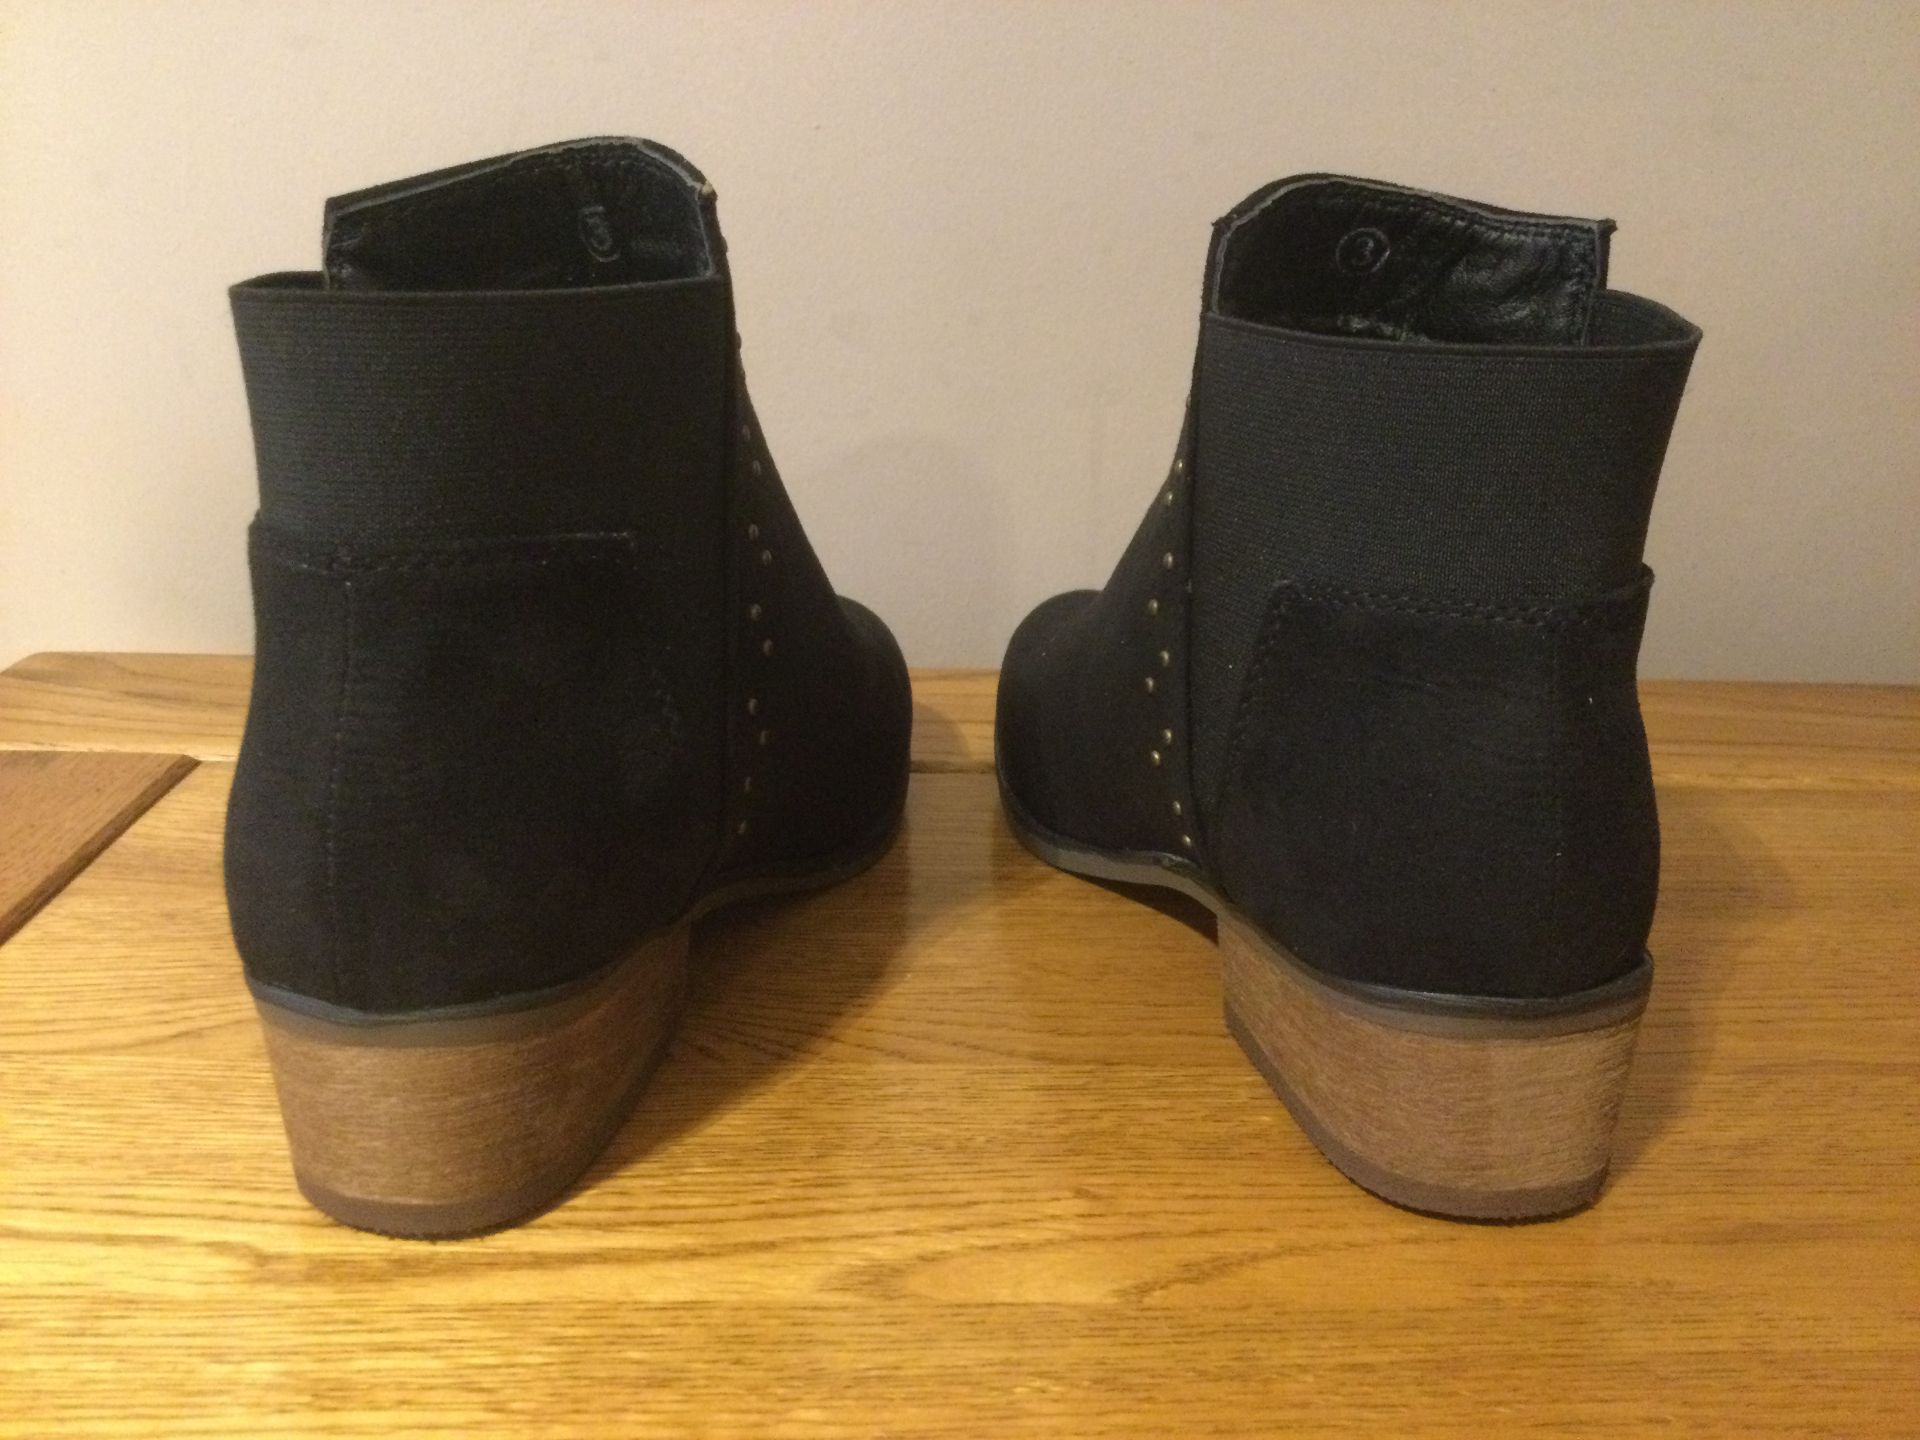 Dolcis “Wendy” Low Heel Ankle Boots, Size 5, Black - New RRP £45.99 - Image 3 of 7